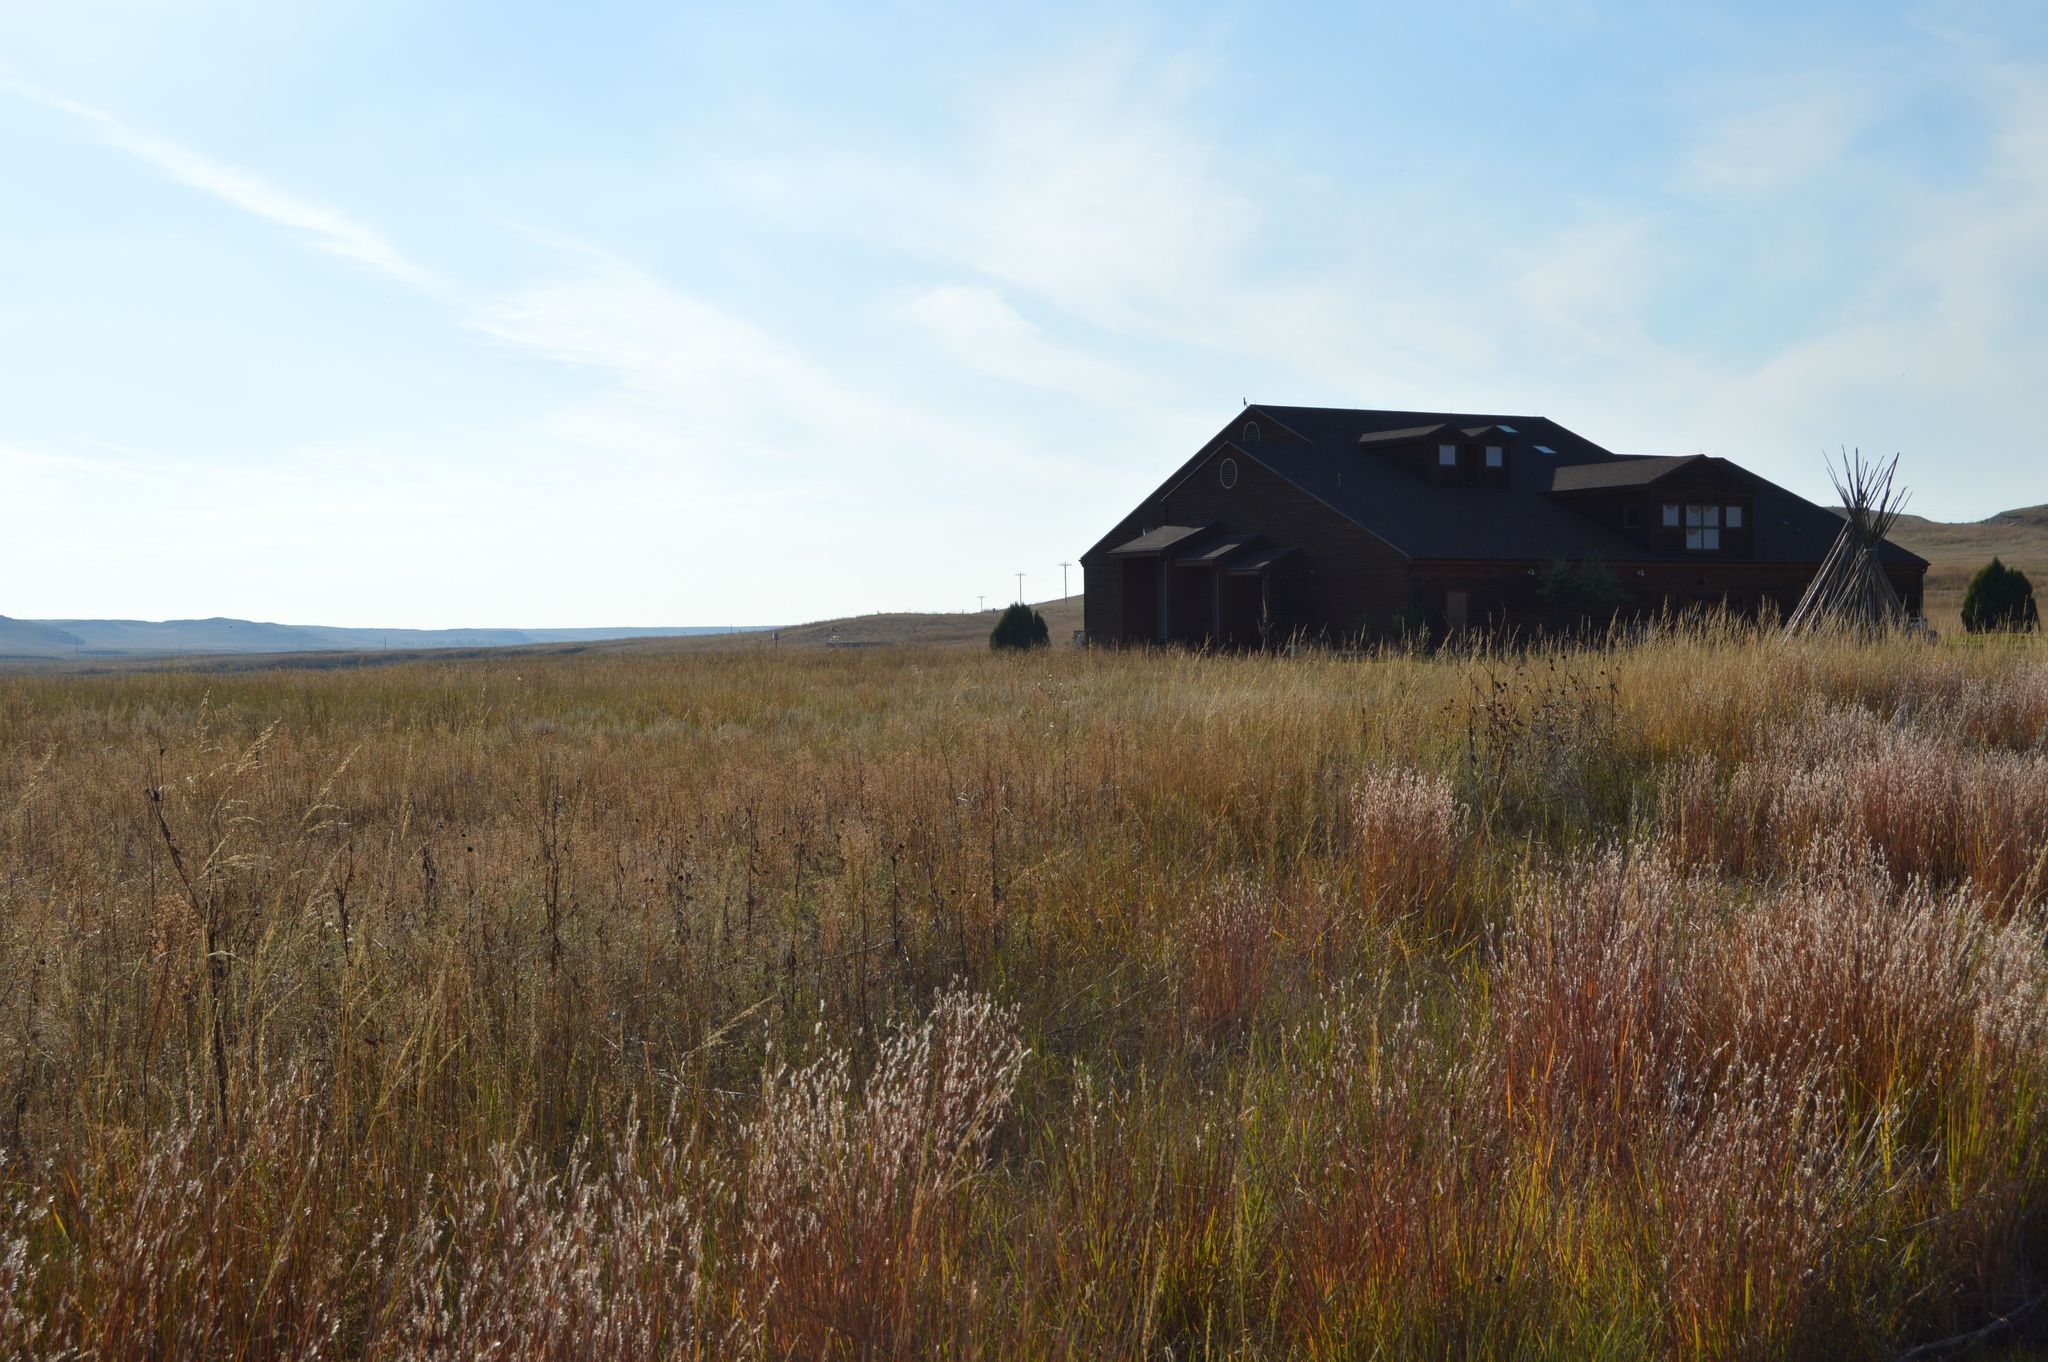 From the Fossil Hills Trail the Visitor Center is a ship in a sea of prairie grasses.